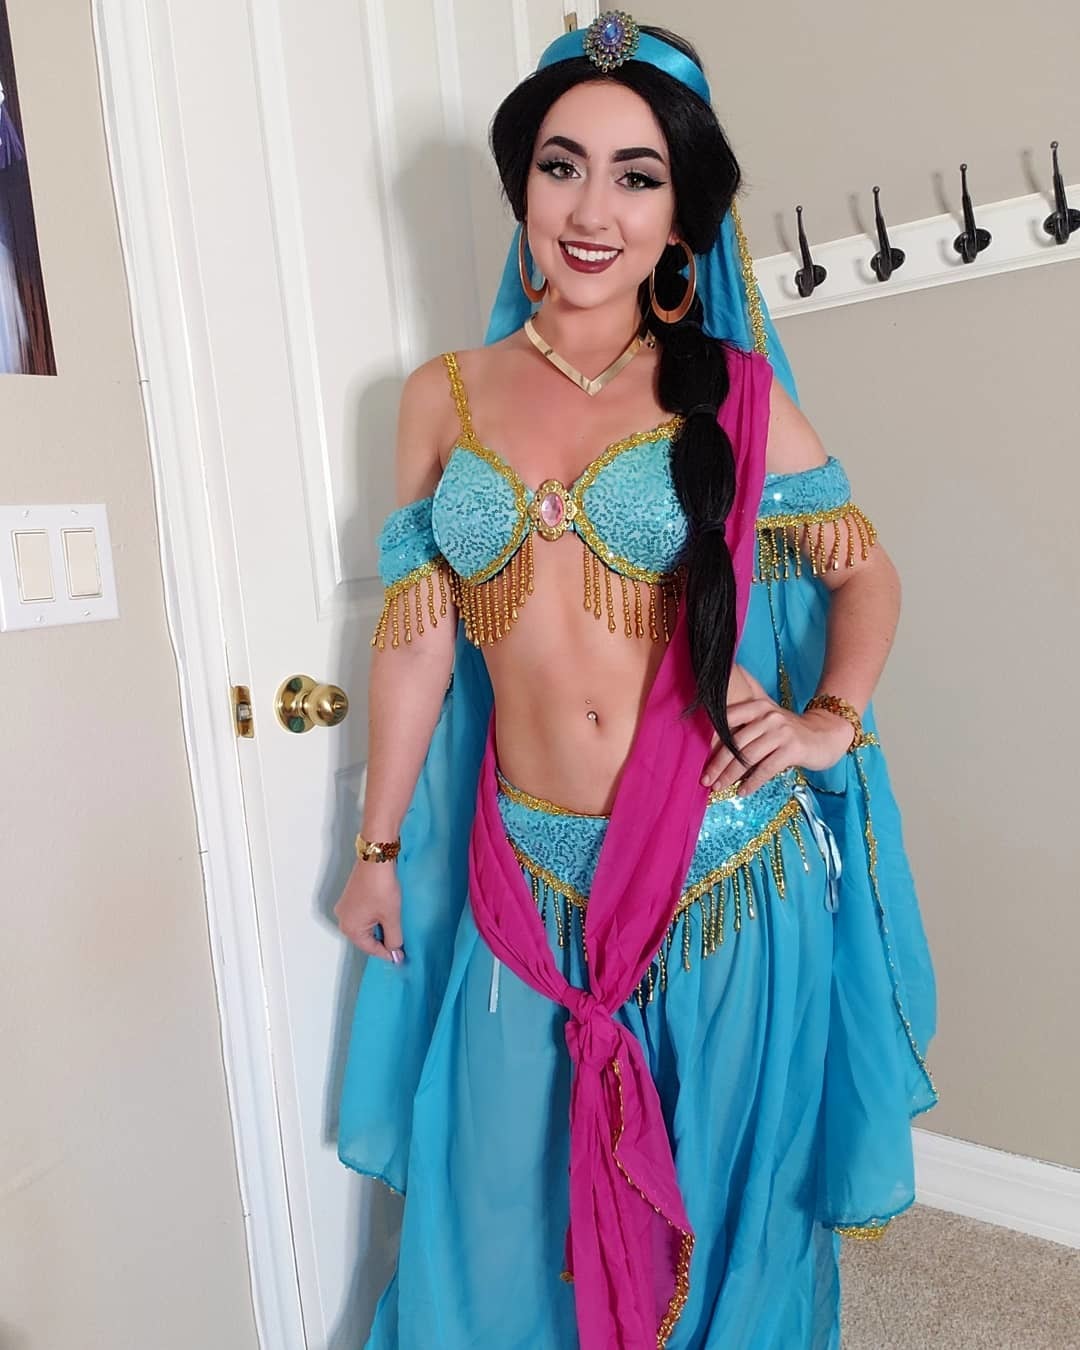 View Princess Jasmine (By KarriganTaylor) for free | Simply-Cosplay